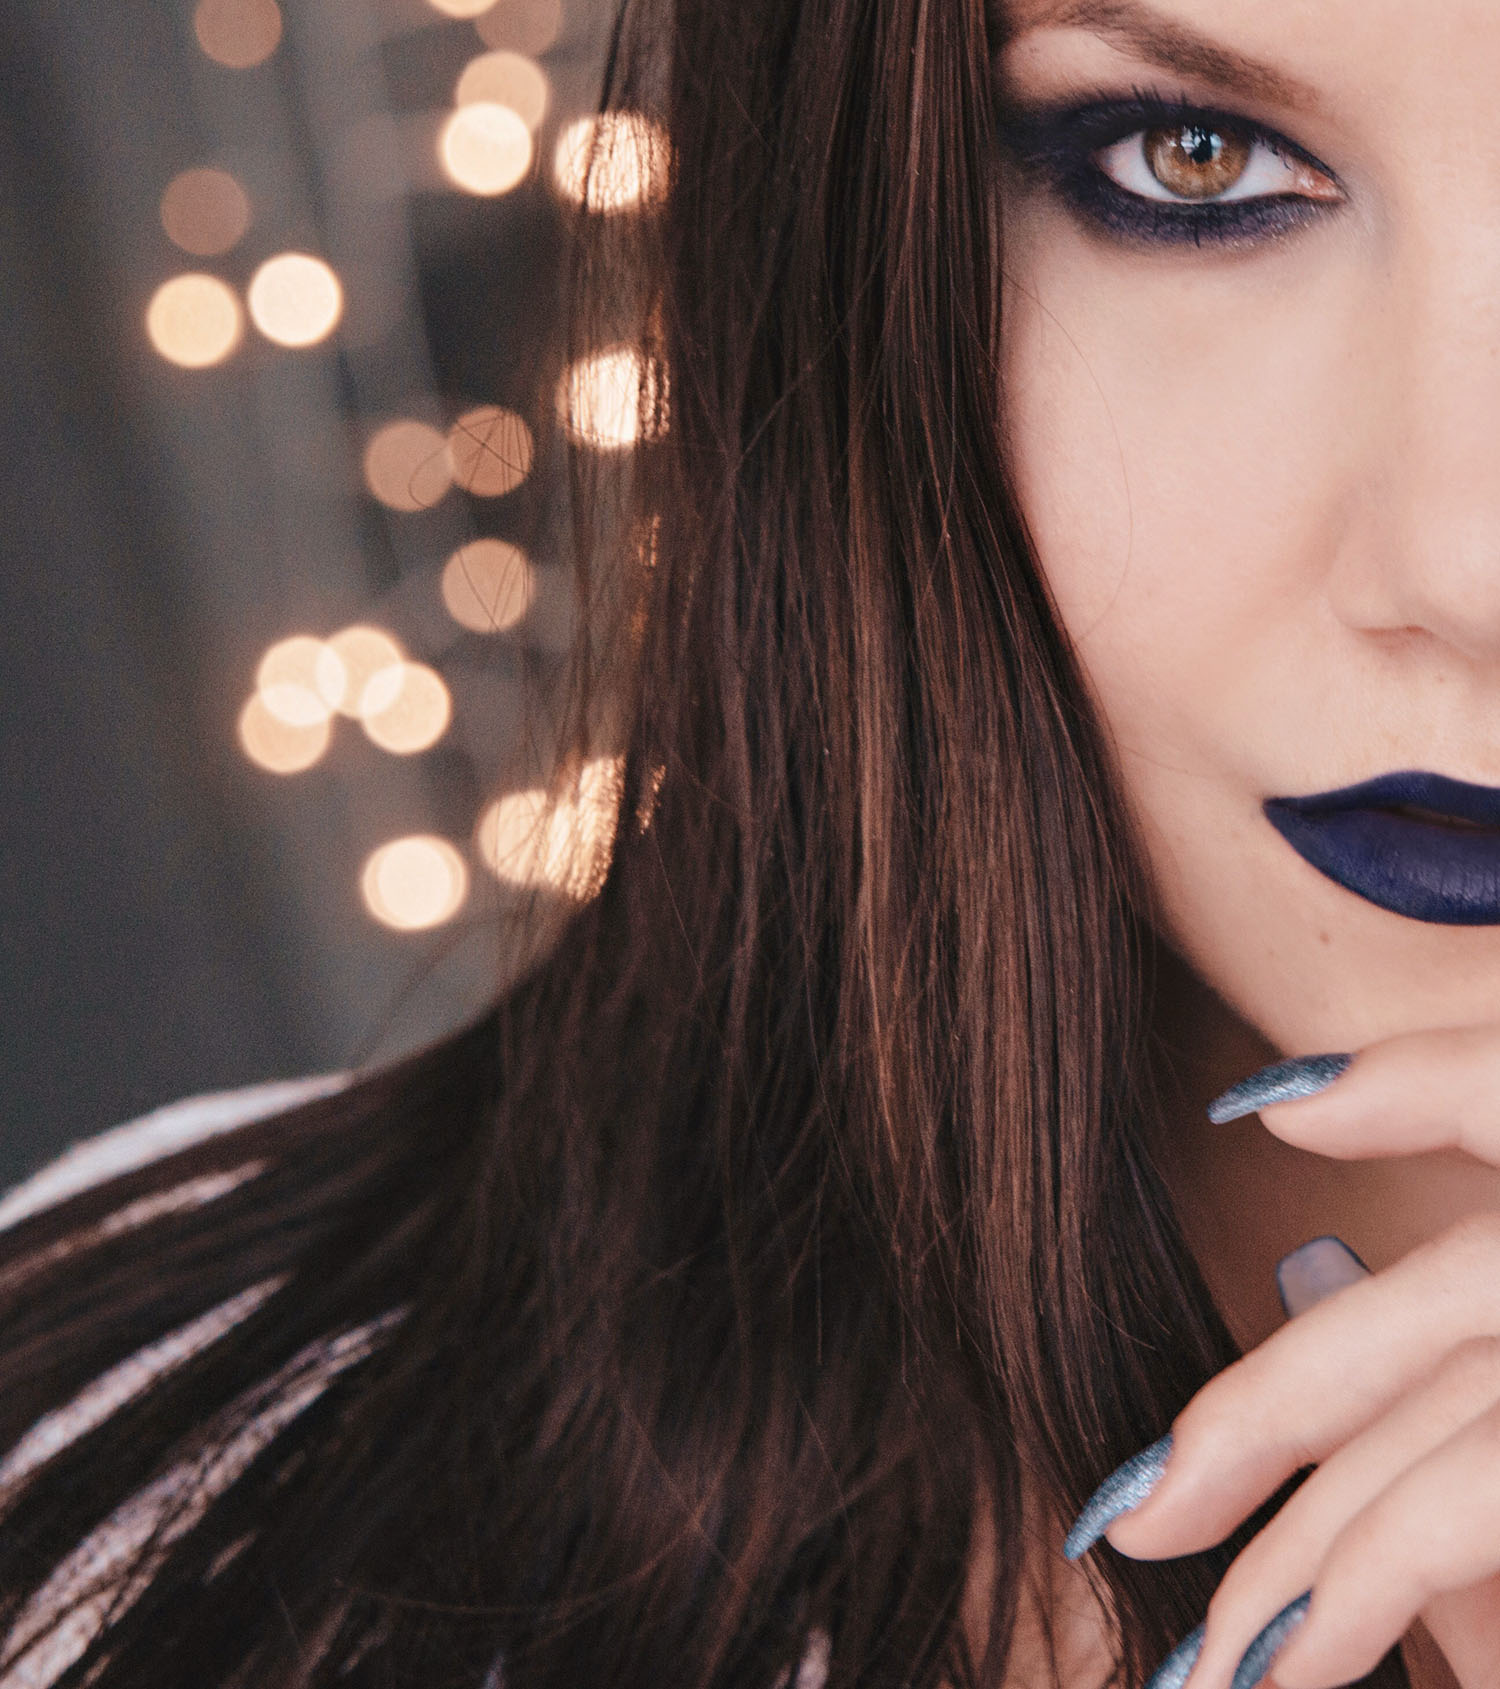 Kat Von D Studded Kiss Lipstick Poe - Blue Lips & blue eyeshadow - Processed with VSCO with hb2 preset